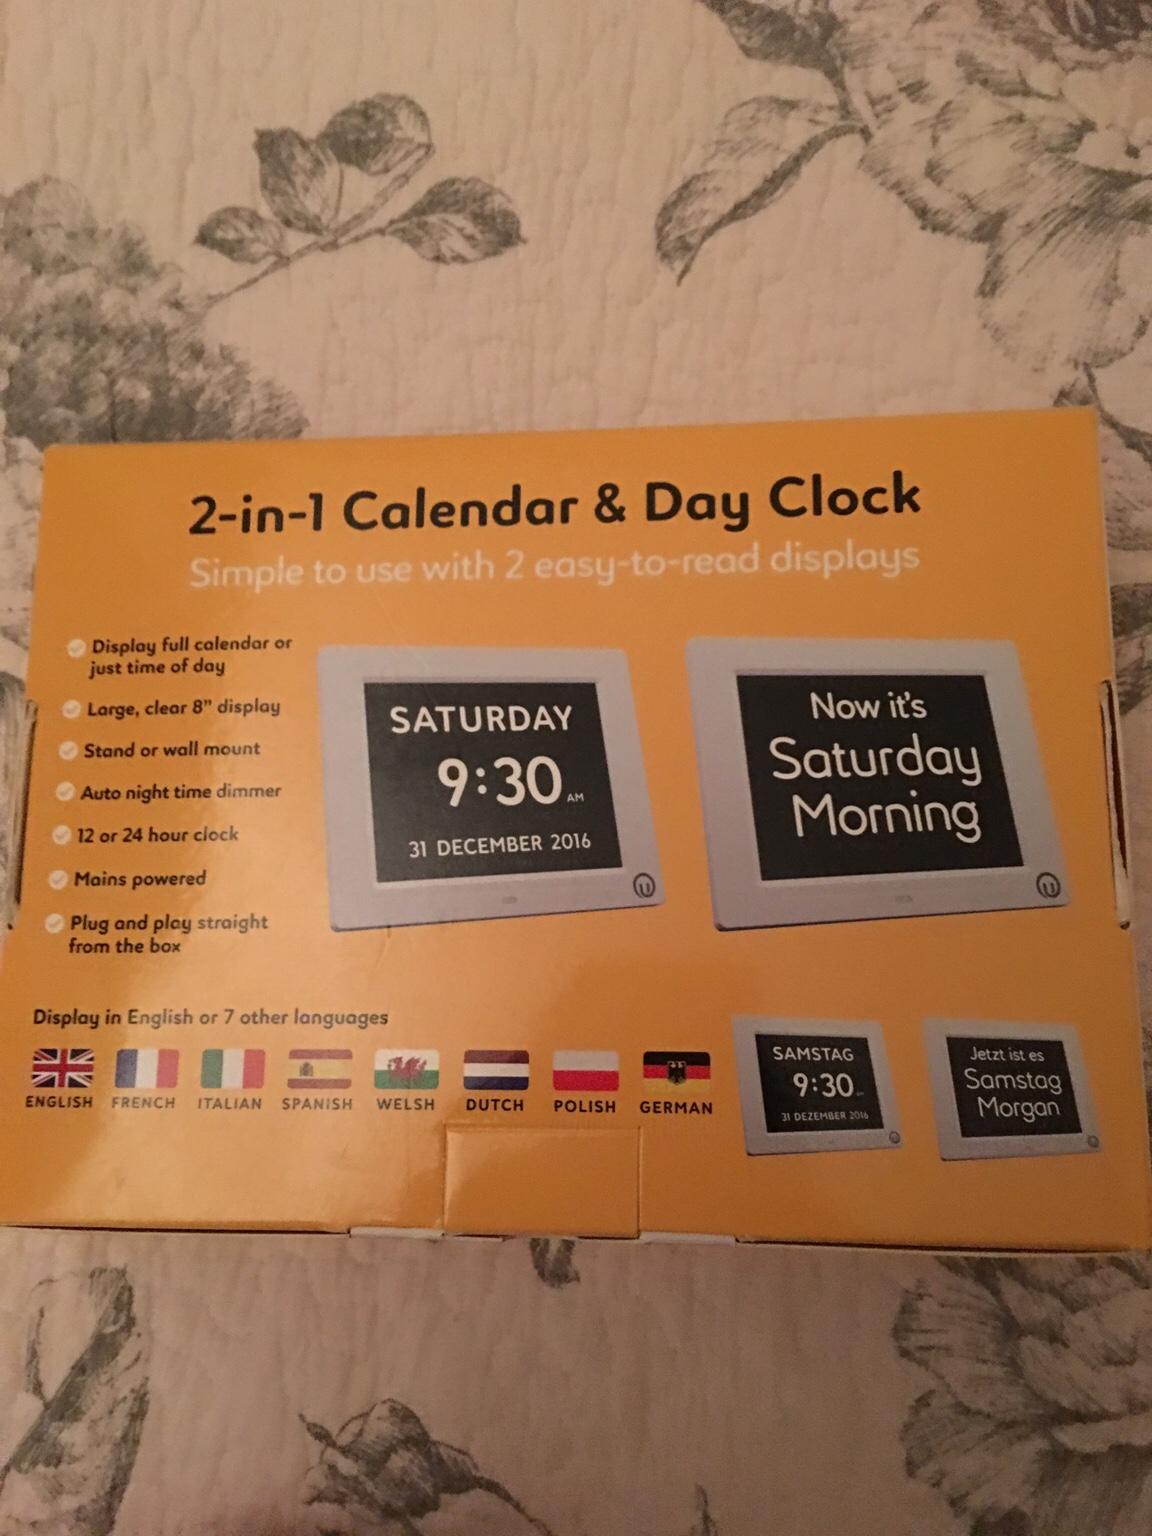 2in1 calendar and day clock in BR2 Bromley for £15.00